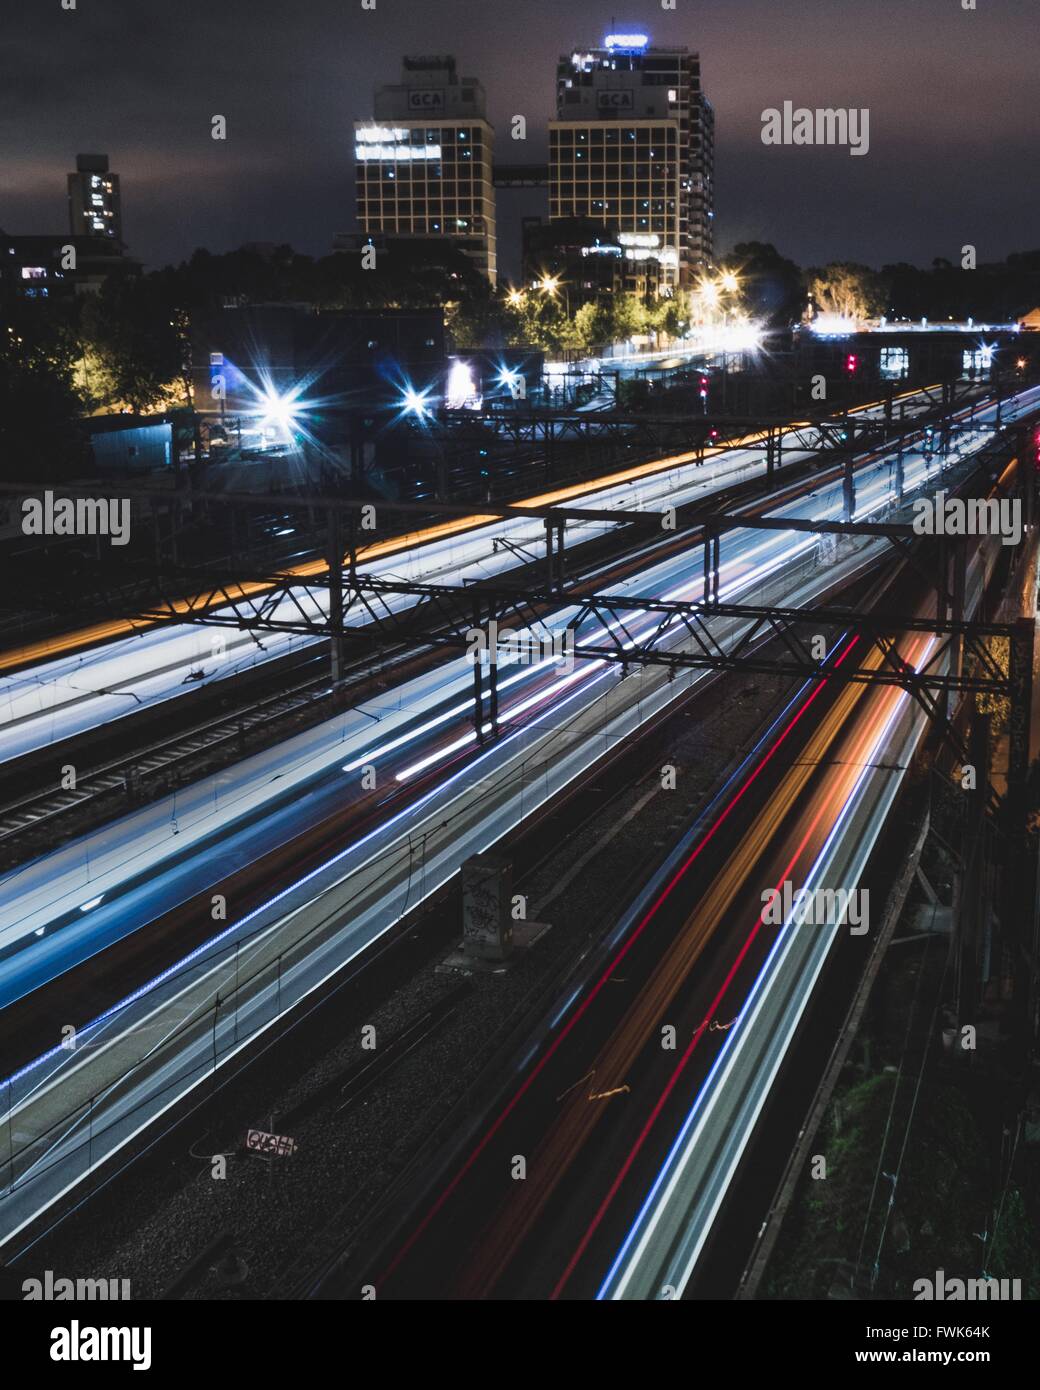 Blurred Image Of Trains Moving On Tracks At Night Stock Photo